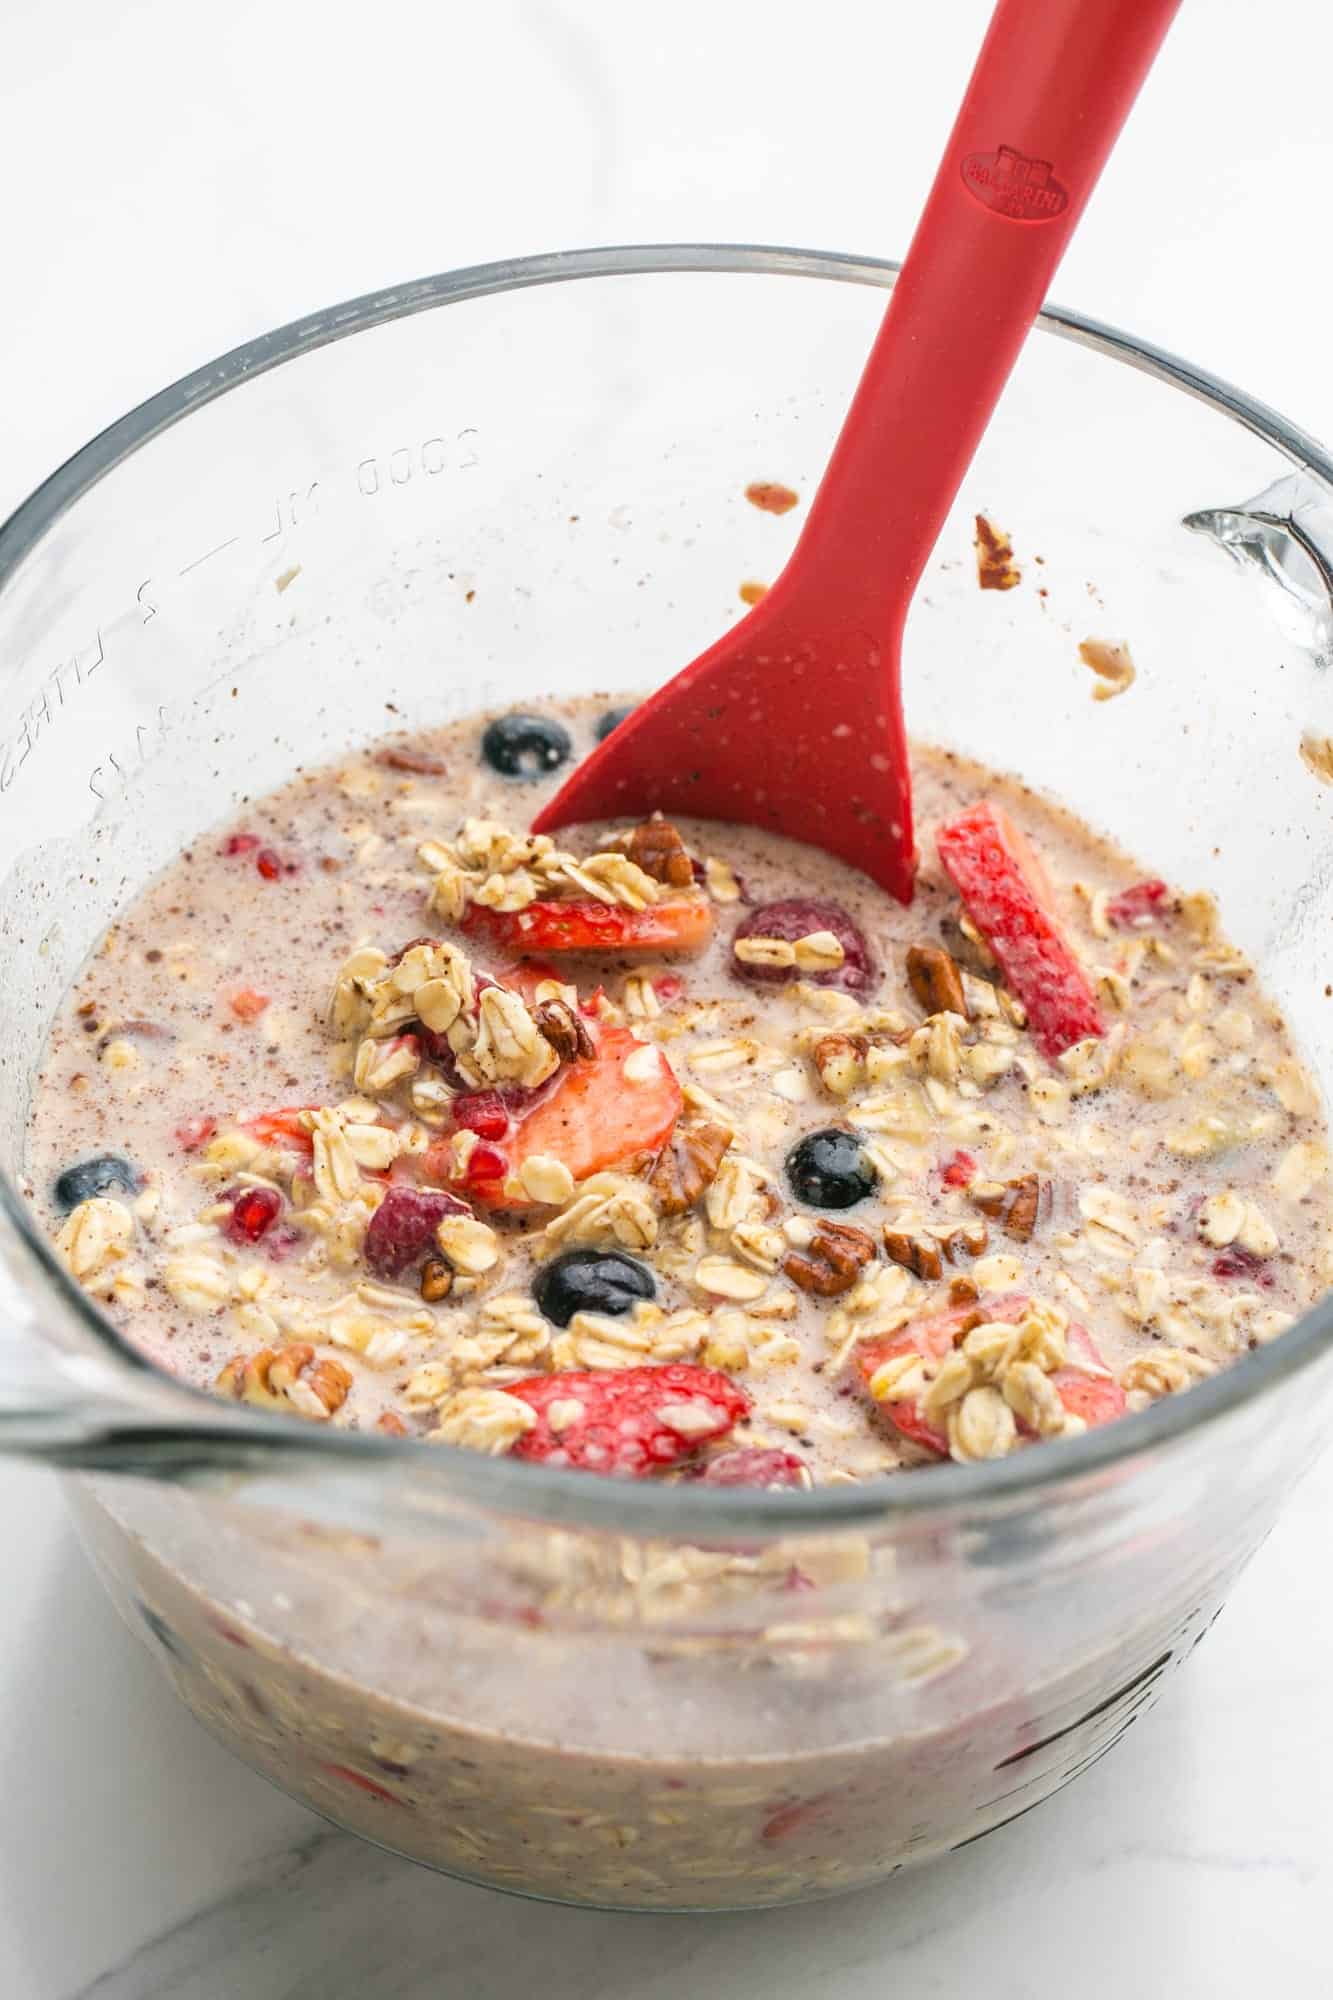 Oats, berries milk, and ingredients being mixed in a glass bowl to make baked oatmeal in a pan.